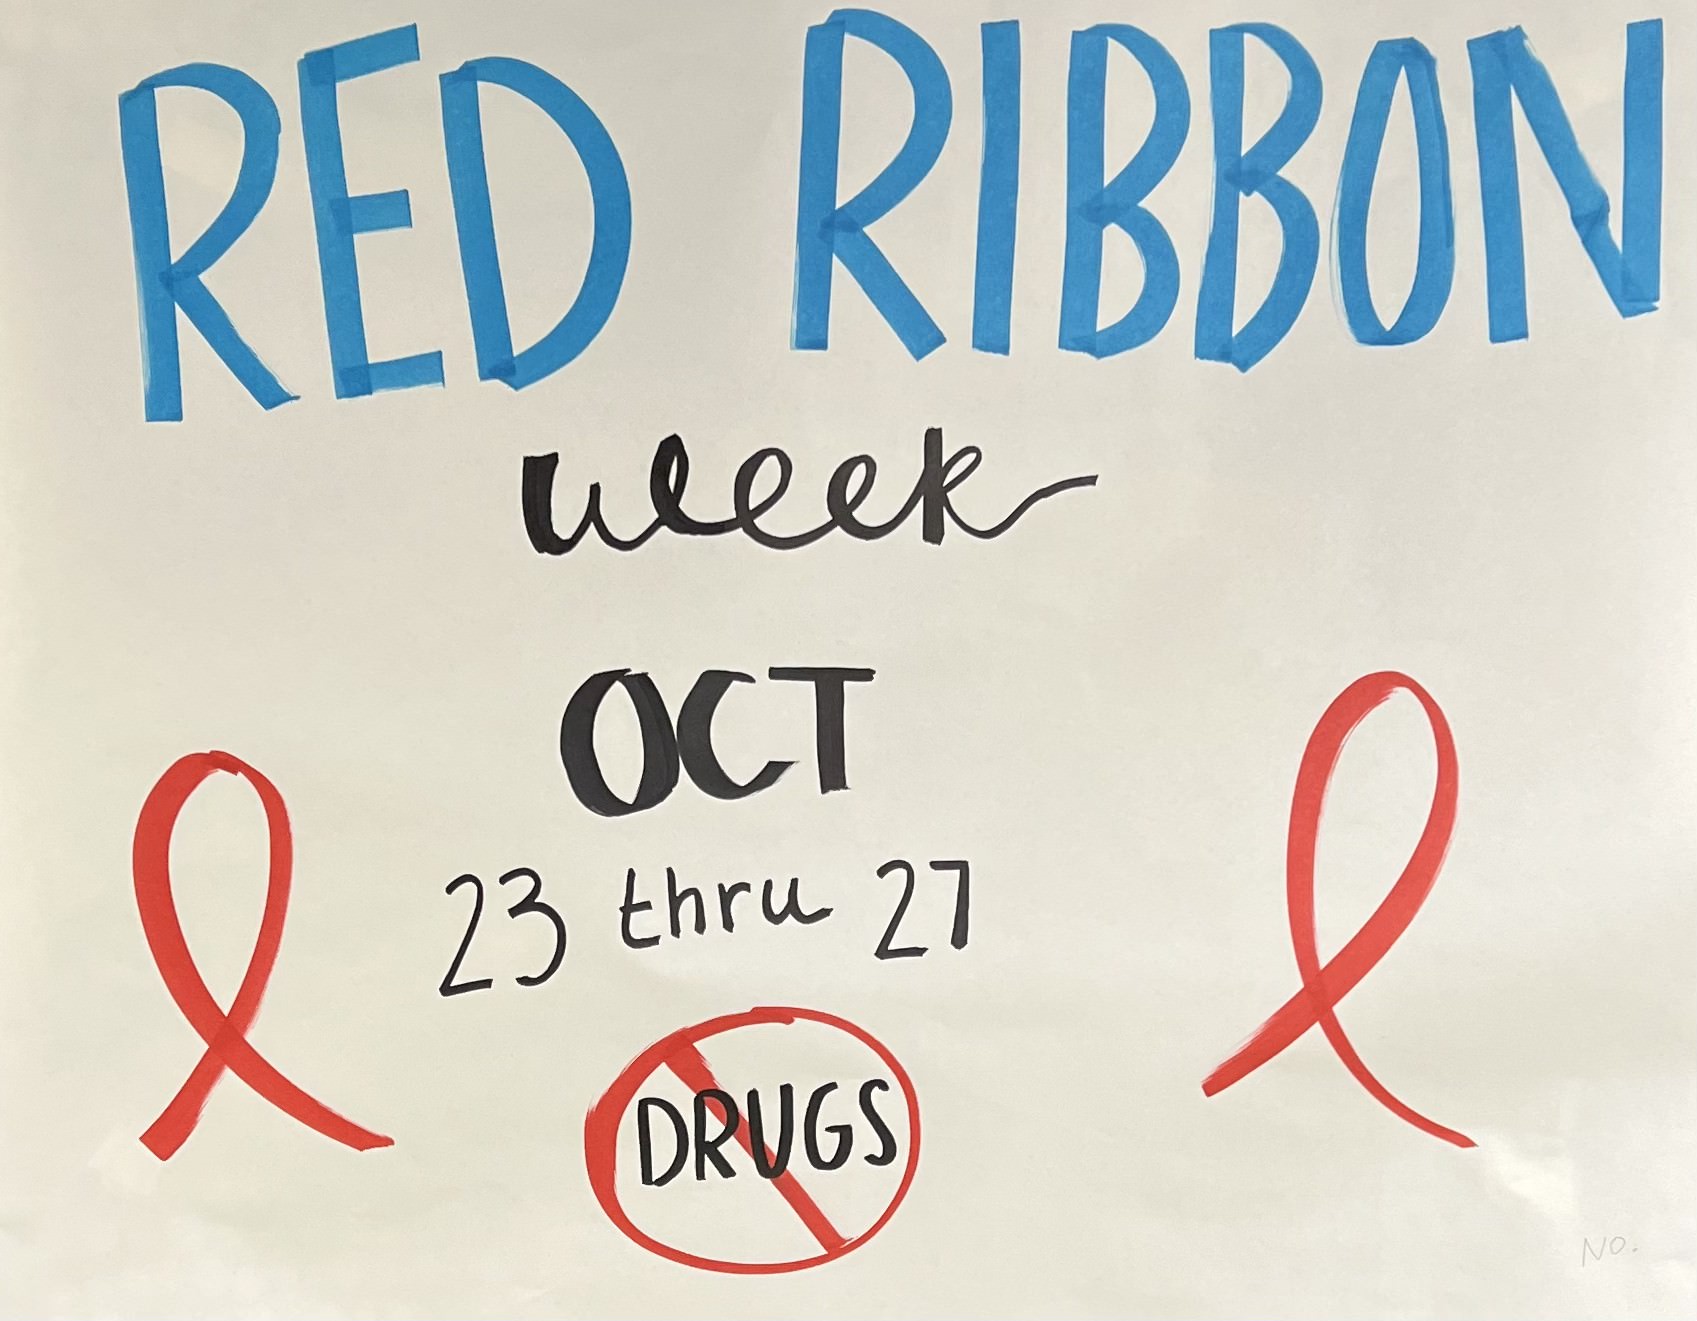 A poster made by SADD that recognizes Red Ribbon Week.